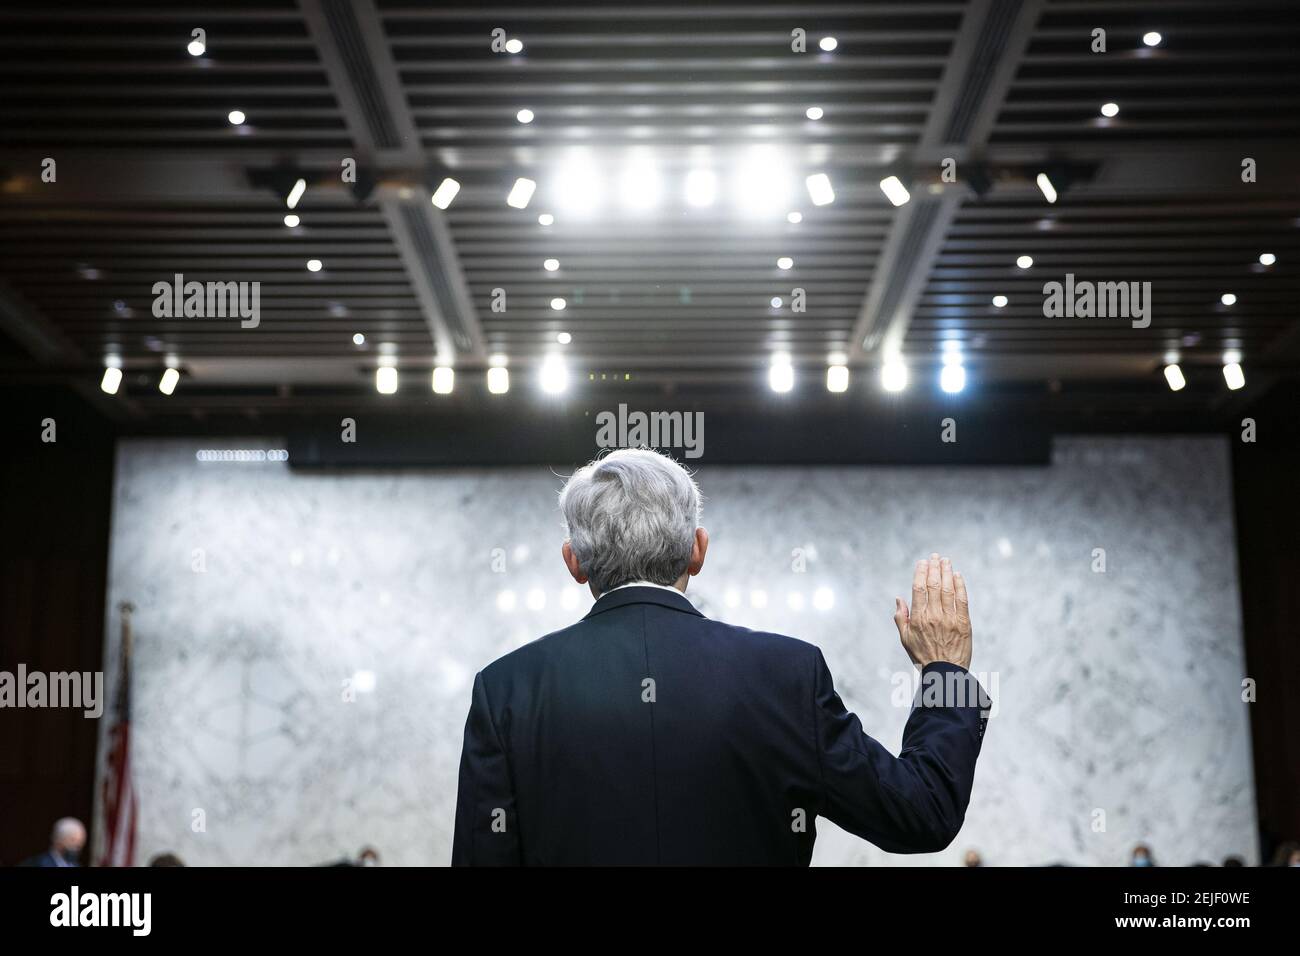 Washington, United States. 22nd Feb, 2021. Attorney General nominee Merrick Garland is sworn-in during his confirmation hearing on Capitol Hill in Washington, DC on February 22, 2021. Garland previously served at the Chief Judge for the U.S. Court of Appeals for the District of Columbia Circuit. Pool Photo by Al Drago/UPI Credit: UPI/Alamy Live News Stock Photo